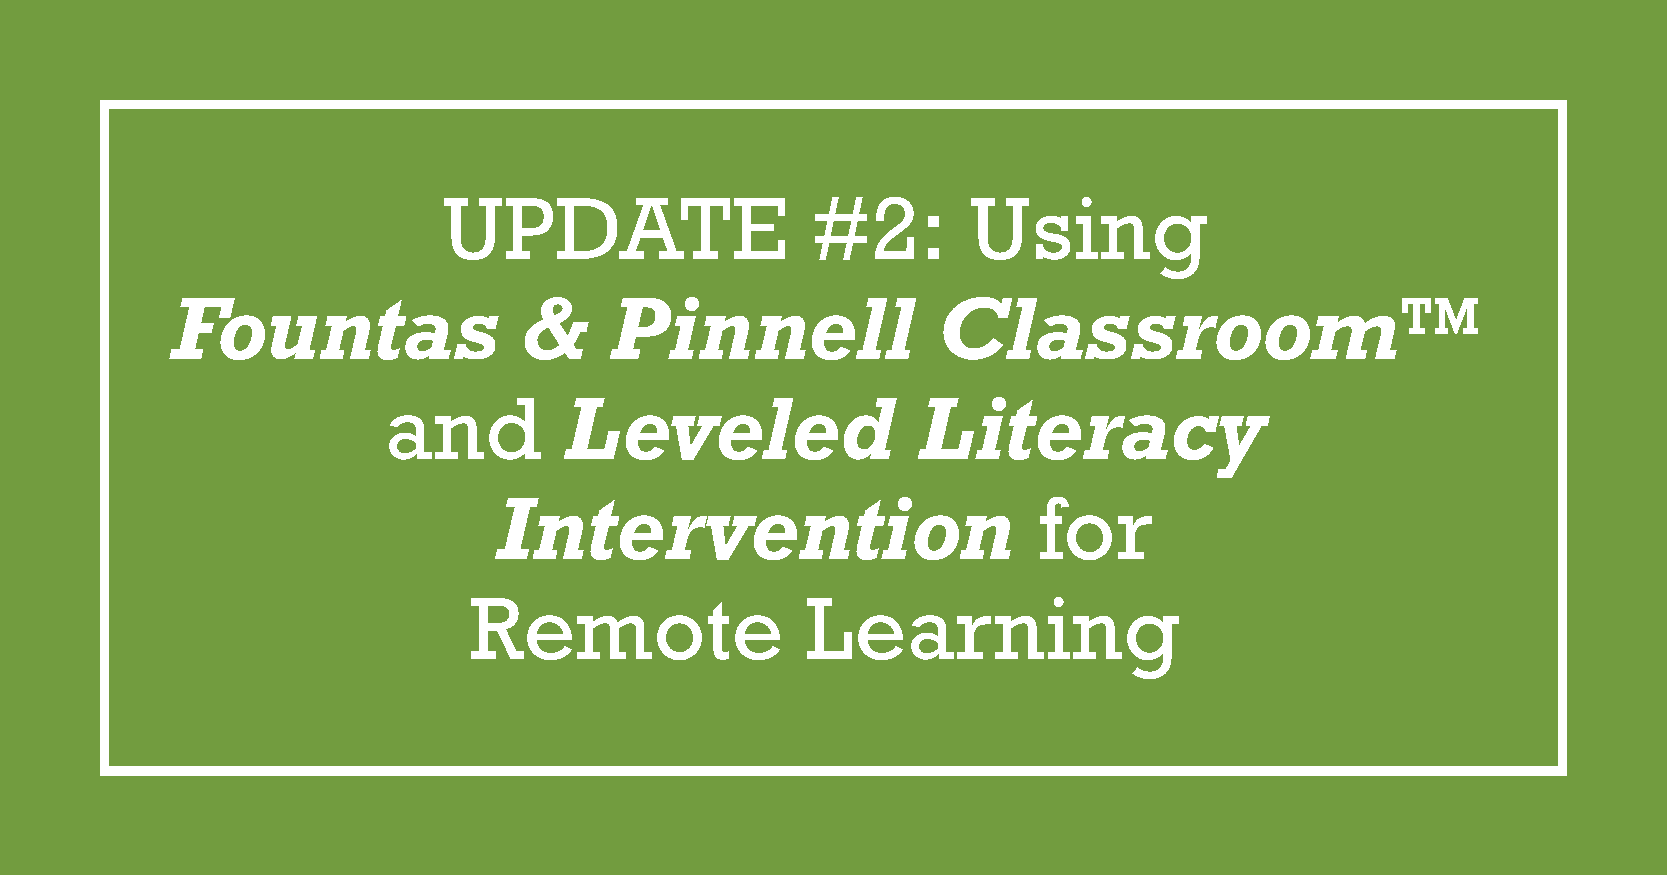 BLOG TITLE: UPDATE #2: Using Fountas & Pinnell Classroom™ and Leveled Literacy Intervention for Remote Learning